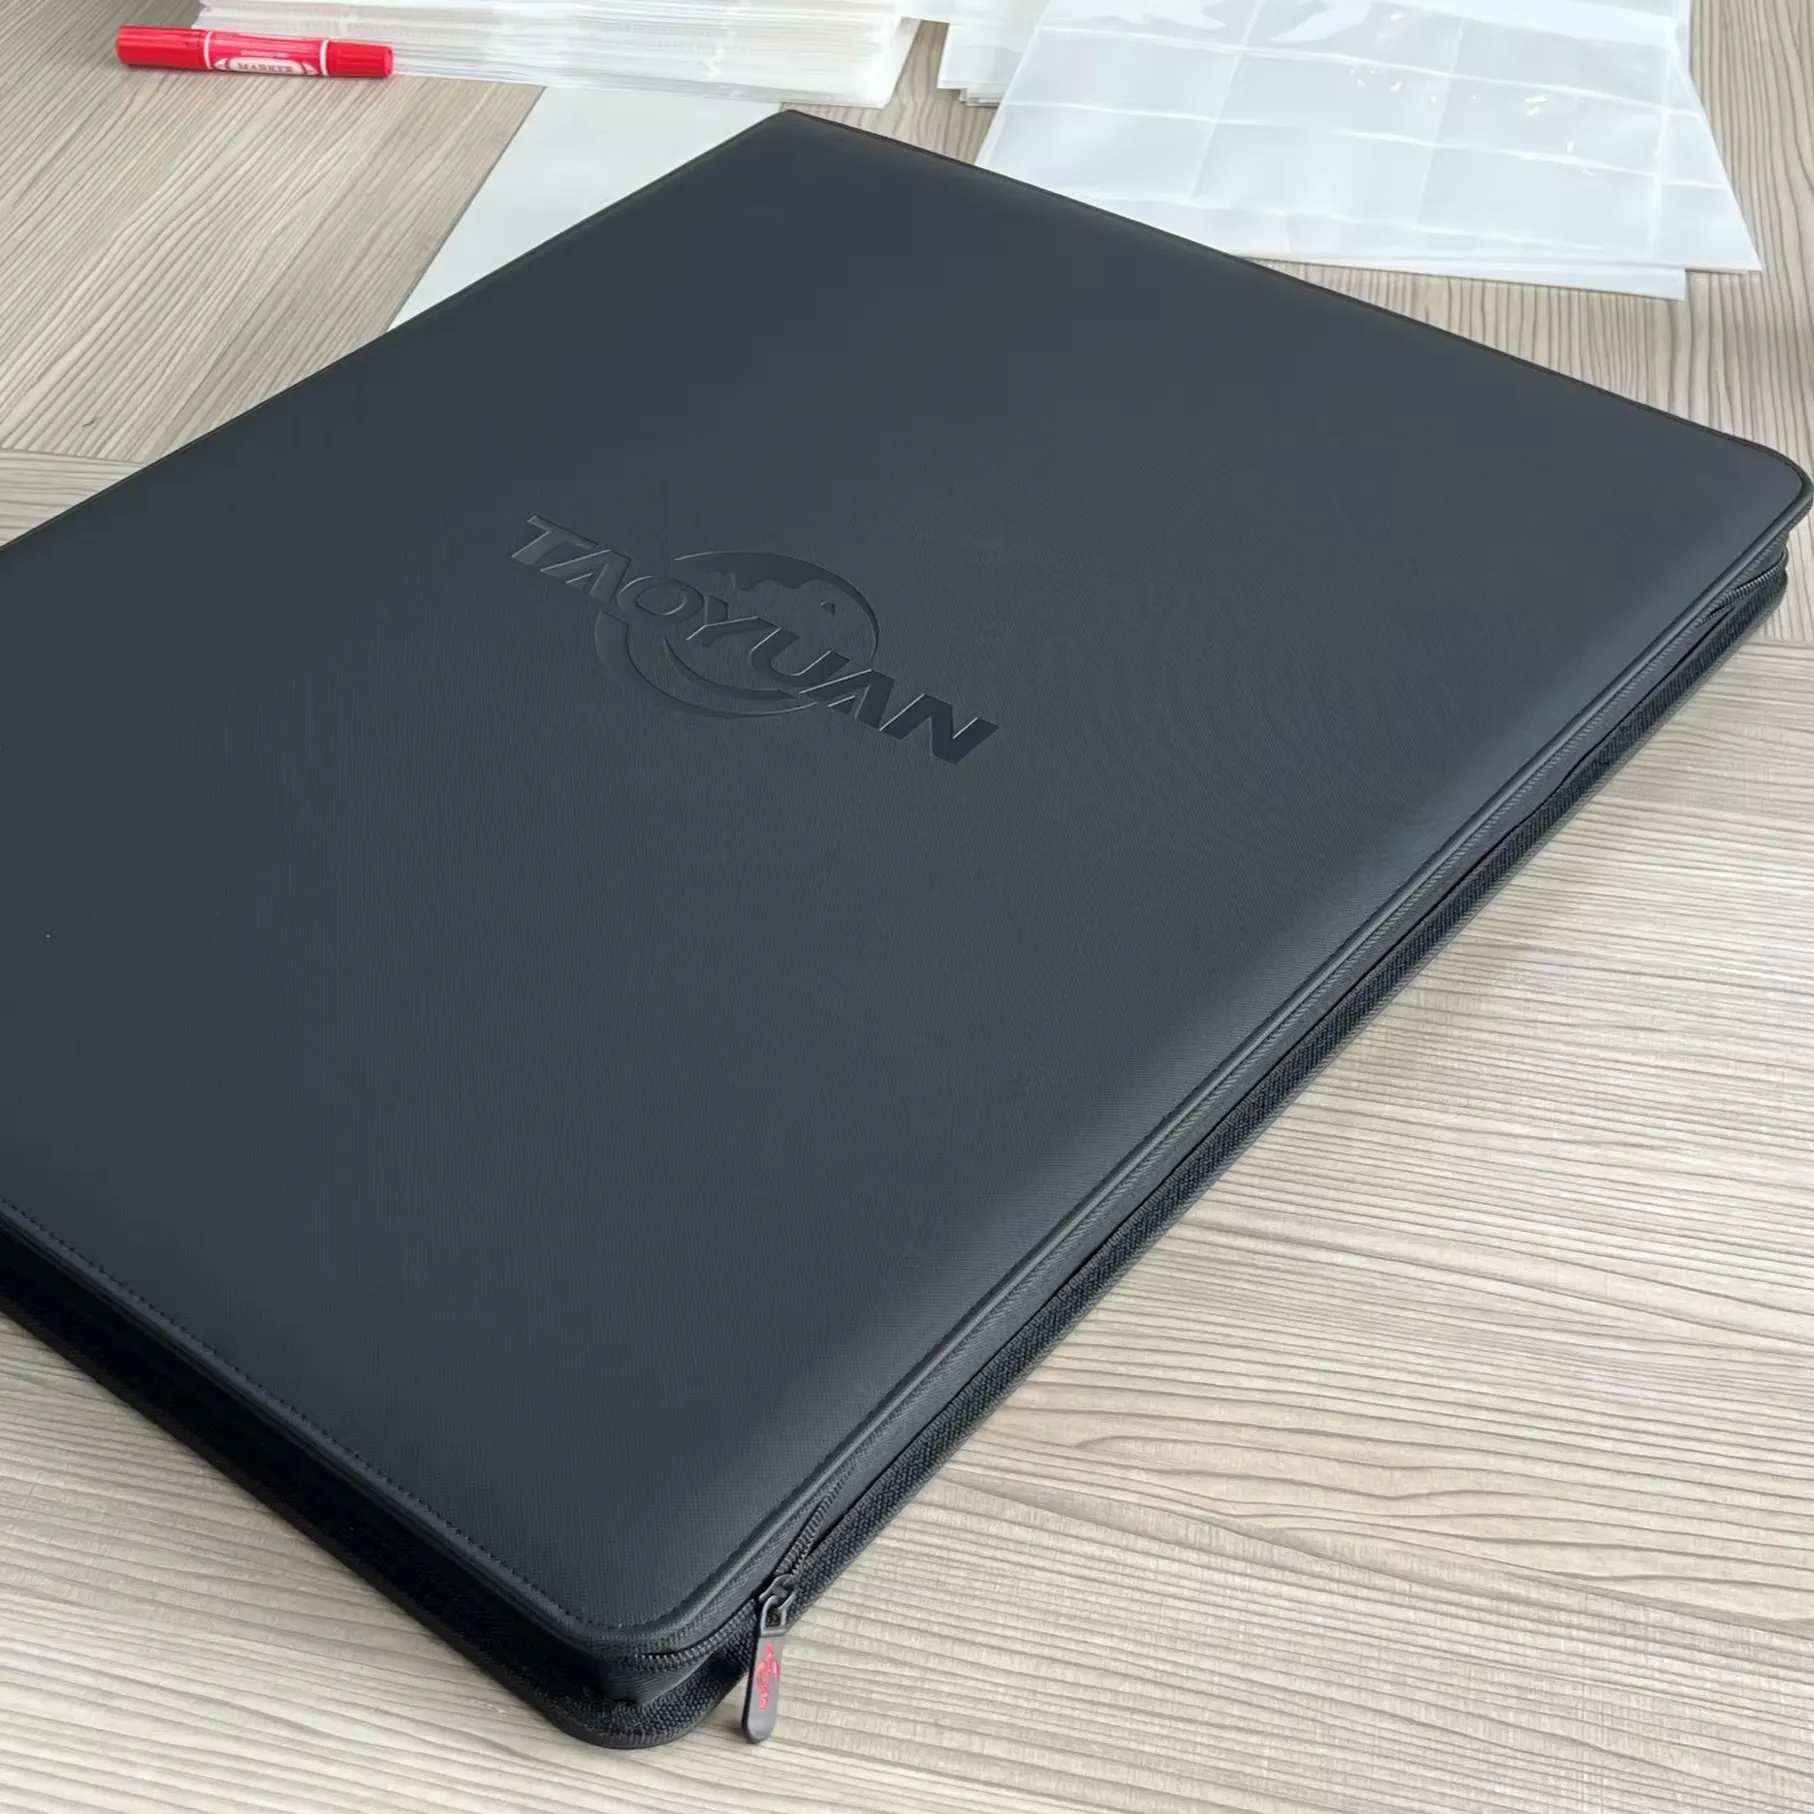 Dongugan Bowen Offering The World's Largest And Highest Quality Trading Card Album With 36 Pocket Design Holds 1440 Card Binder